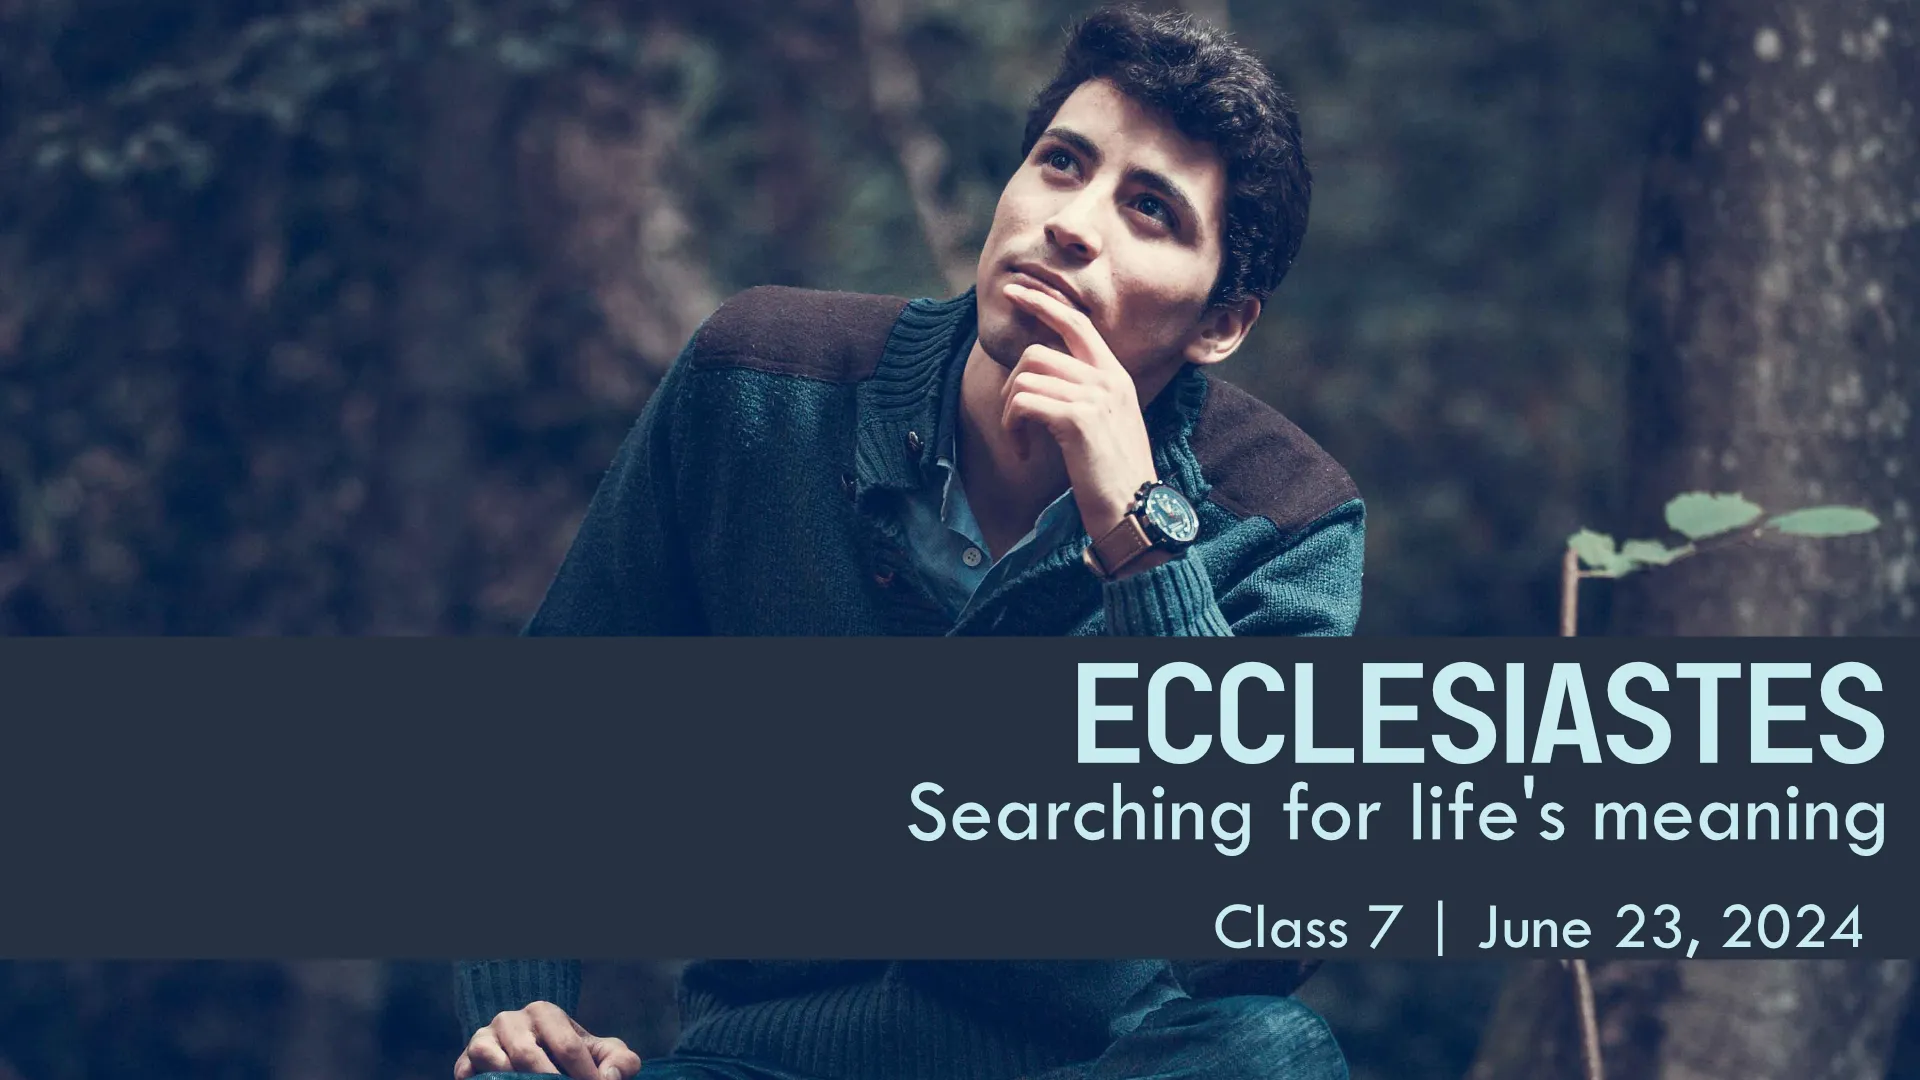 Ecclesiastes: Searching for life's meaning | Class 7